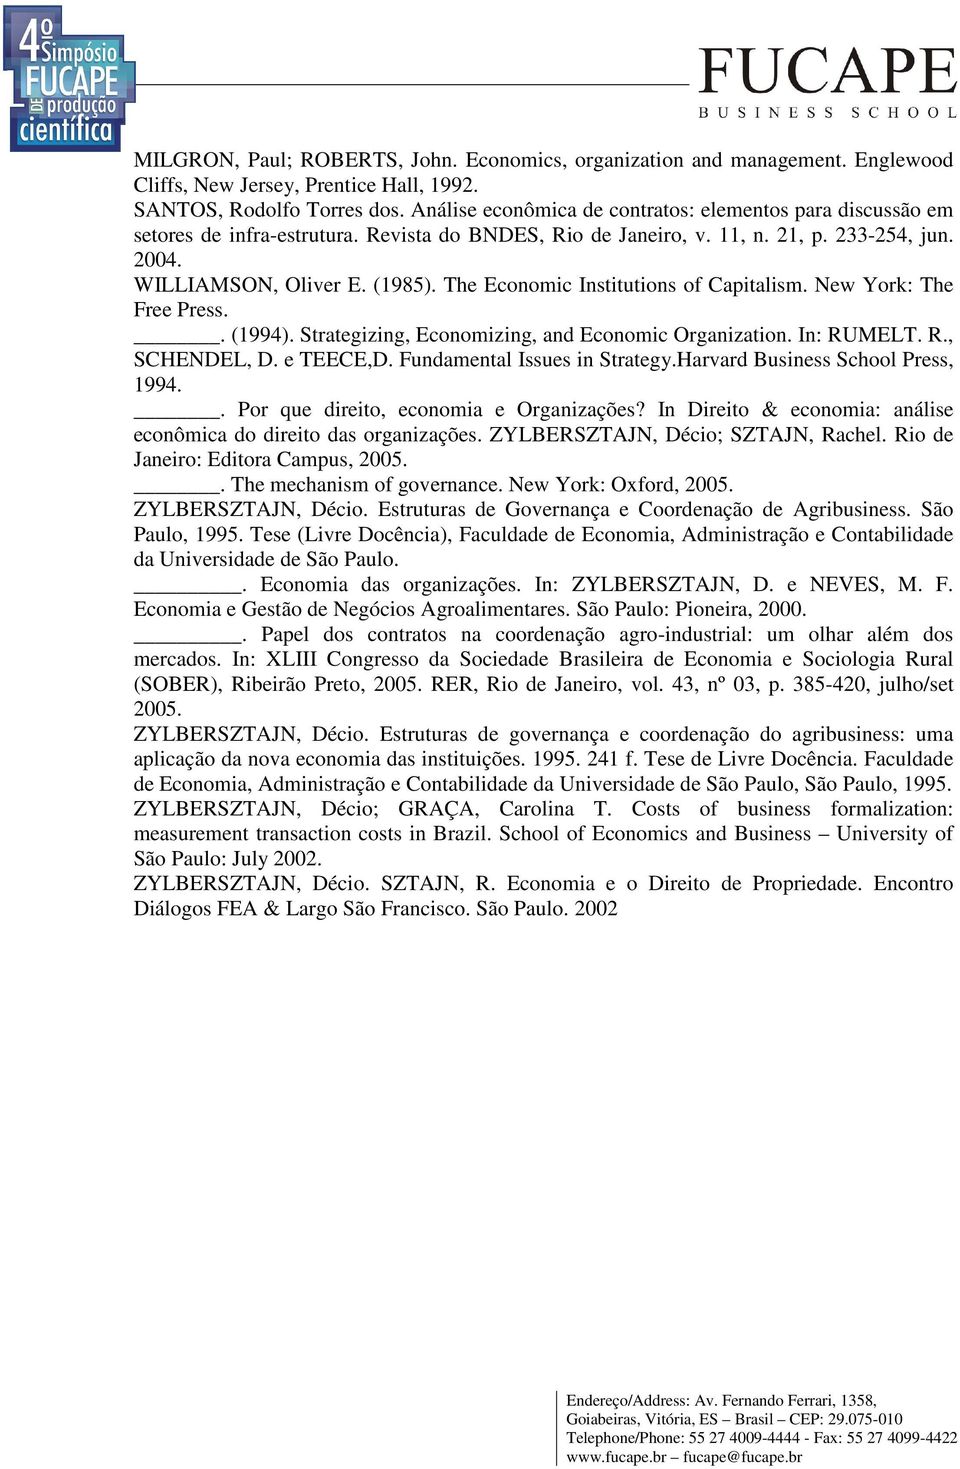 The Economic Institutions of Capitalism. New York: The Free Press.. (1994). Strategizing, Economizing, and Economic Organization. In: RUMELT. R., SCHENDEL, D. e TEECE,D.